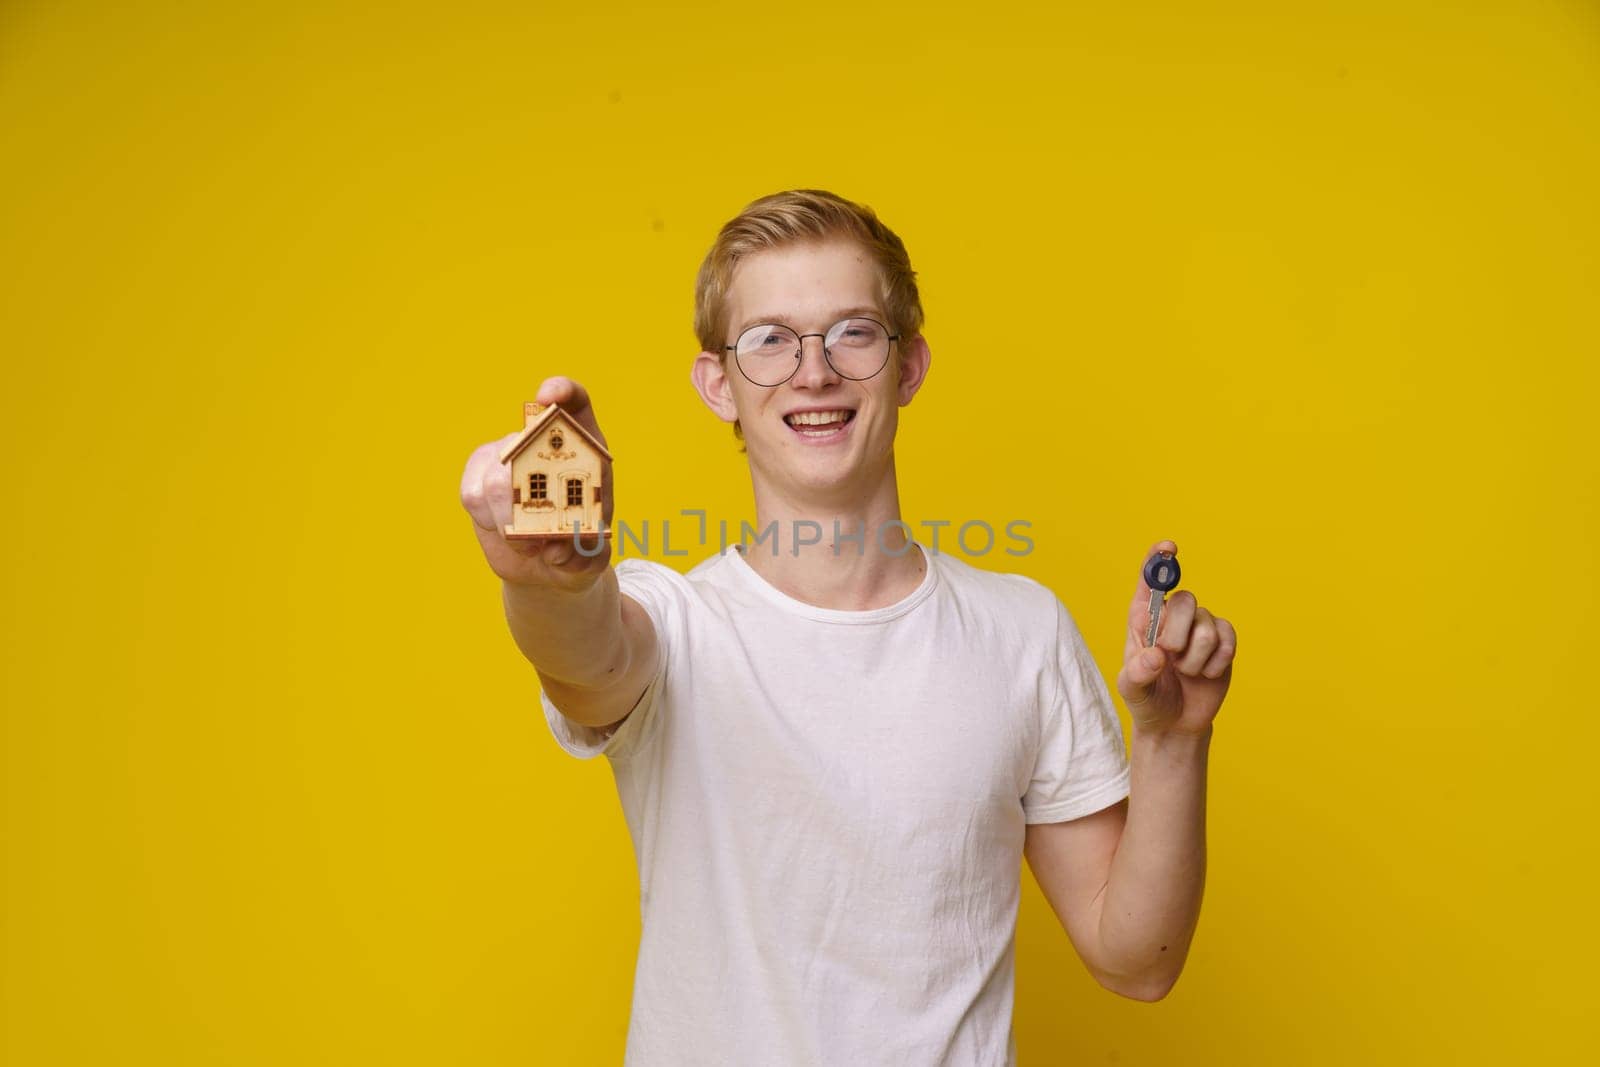 nerdy individual with glasses is holding a mock-up of a house and a key to housing on a bright yellow background. The focus is on the hand holding the house, representing the concept of real estate investment, homeownership, and financial success through hard work and education by LipikStockMedia